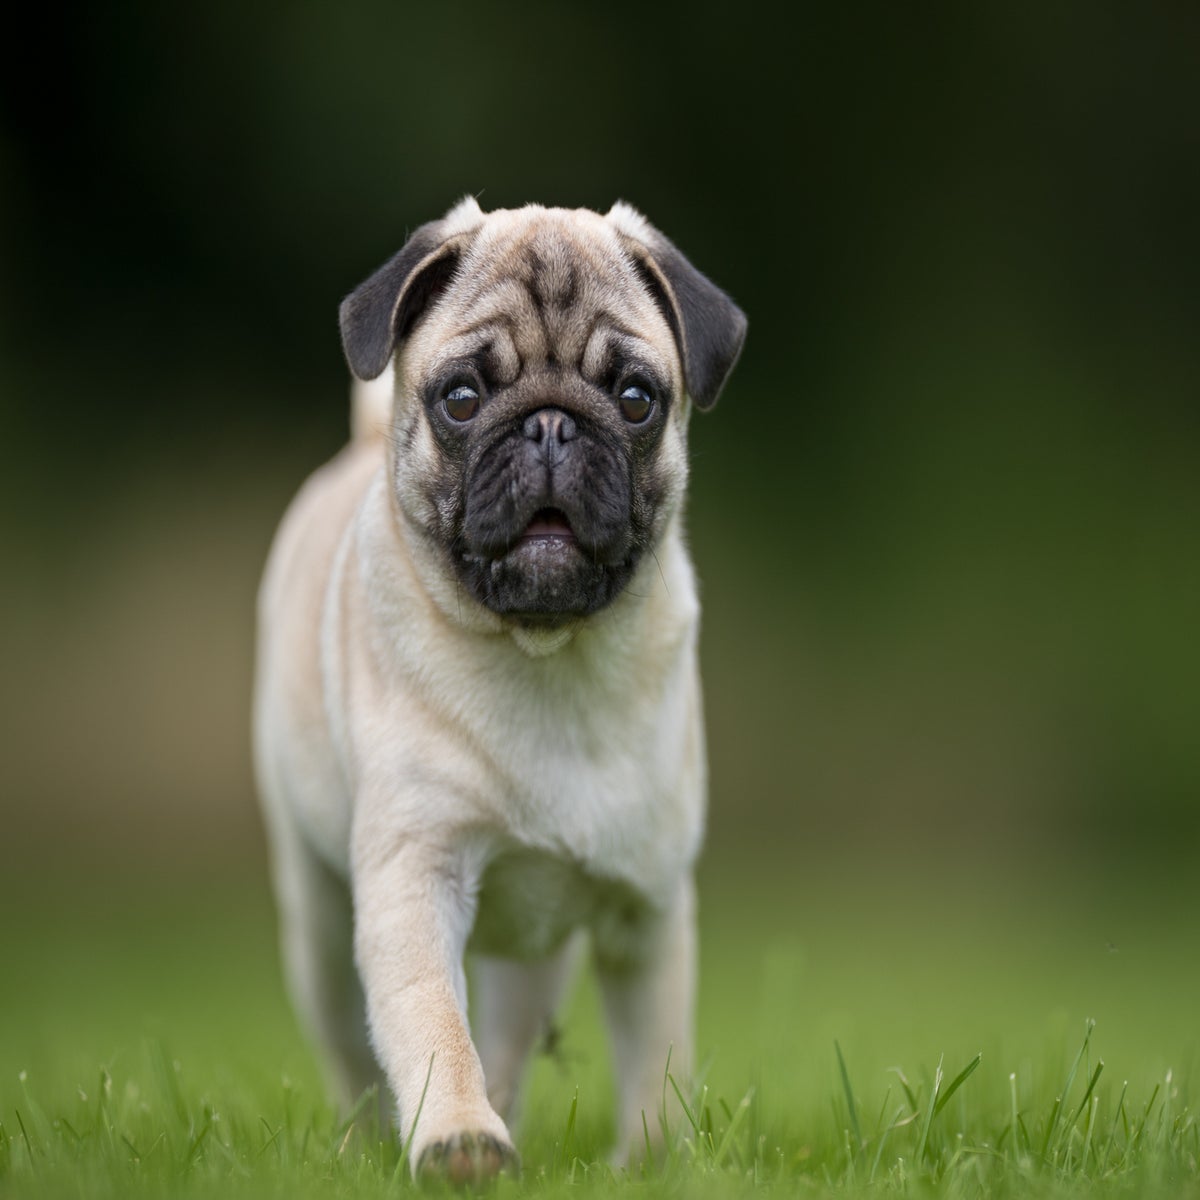 Pugs 'no longer considered typical dog' due to high health risks ...